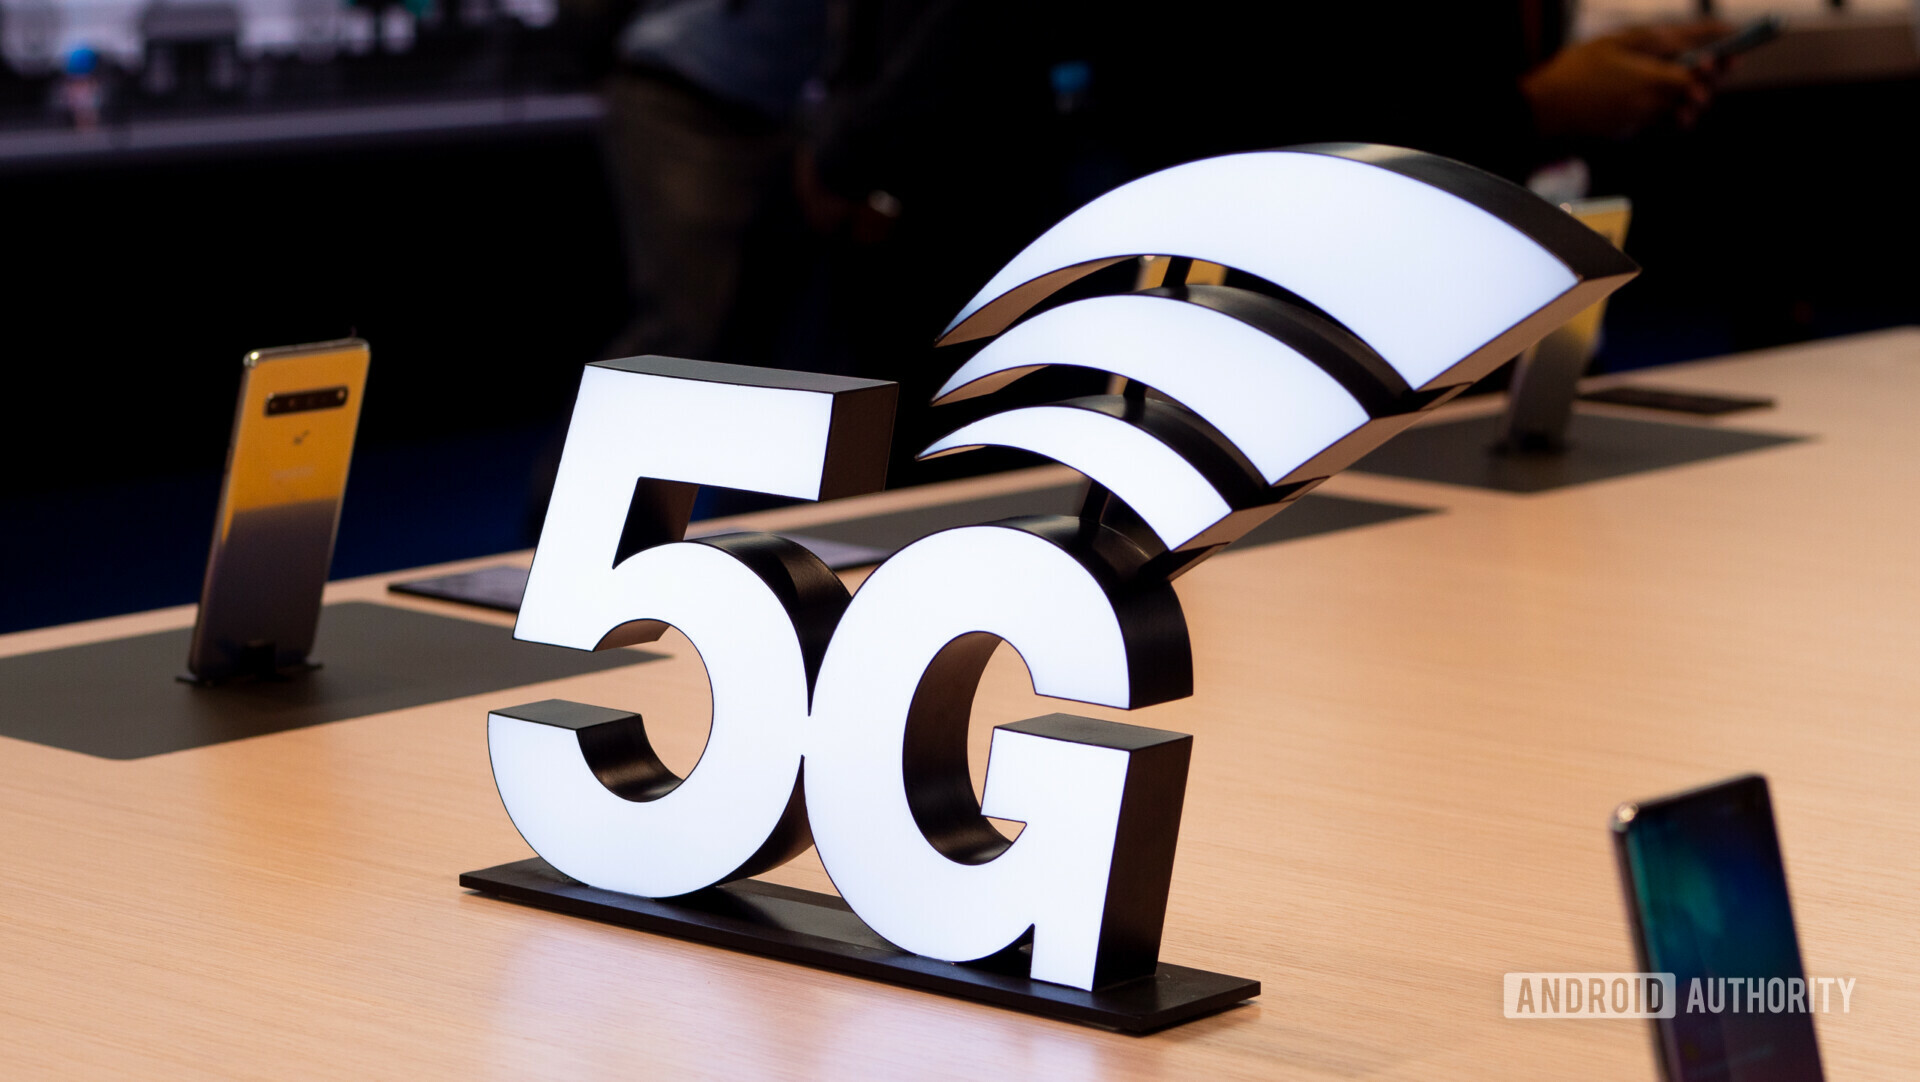 5G logo next to Samsung Galaxy S10 Plus phones - Vodafone UK network review